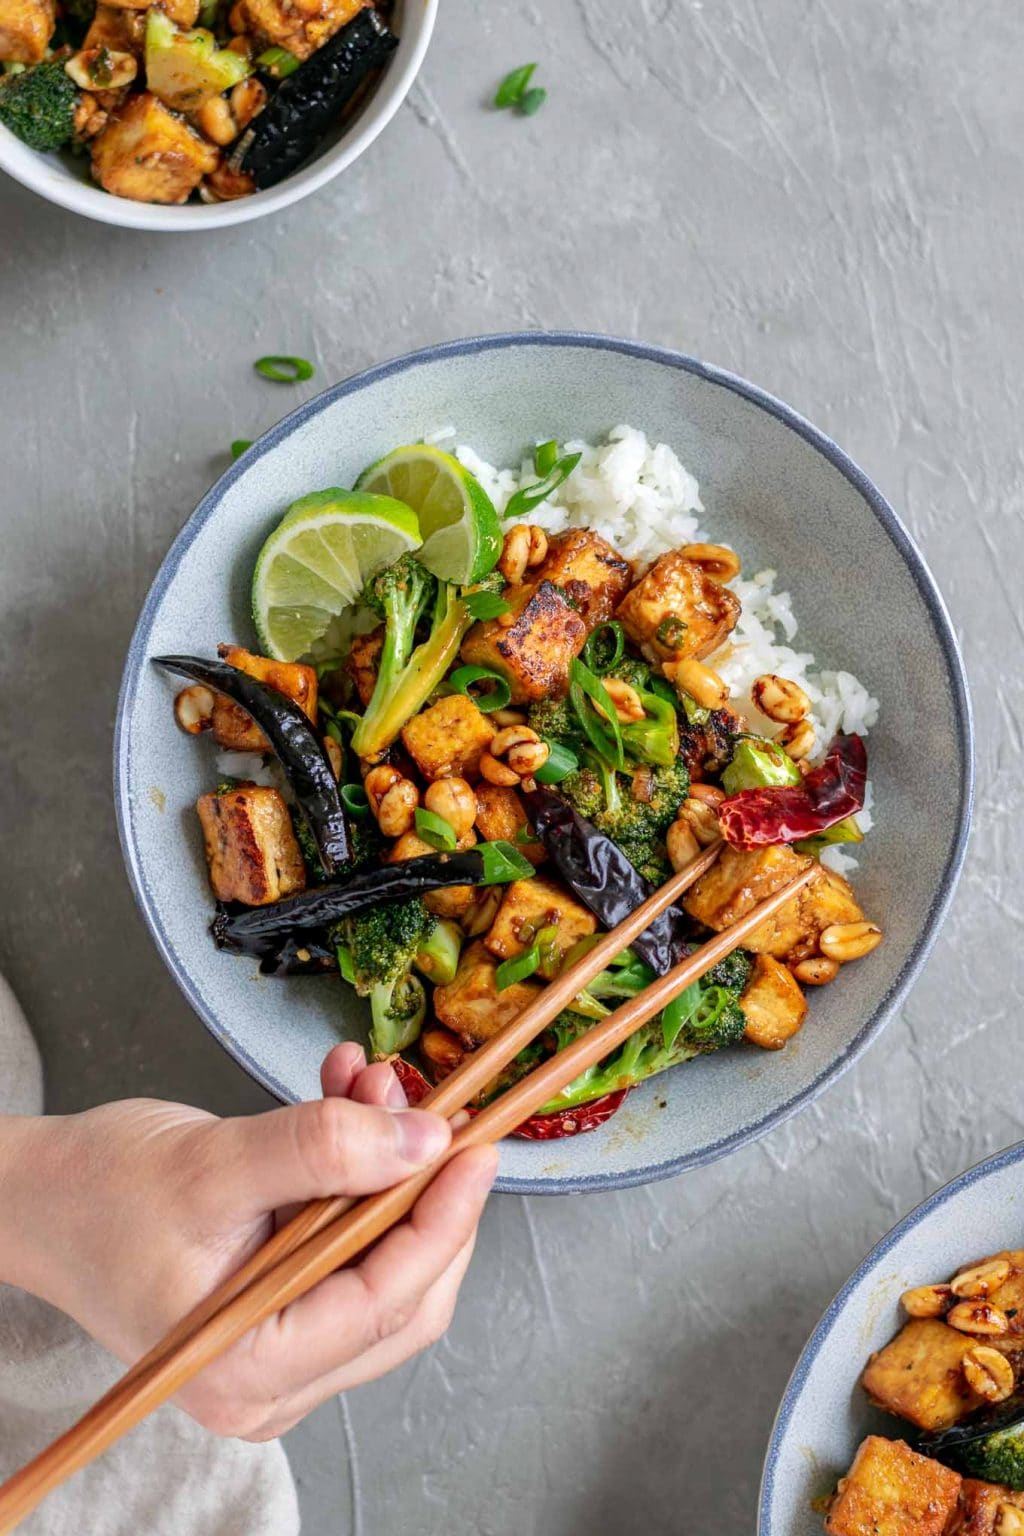 vegan kung pao tofu with broccoli and jasmine rice. Garnished with lime wedges and scallion greens. Chopsticks are being used to pick up a piece of tofu. 